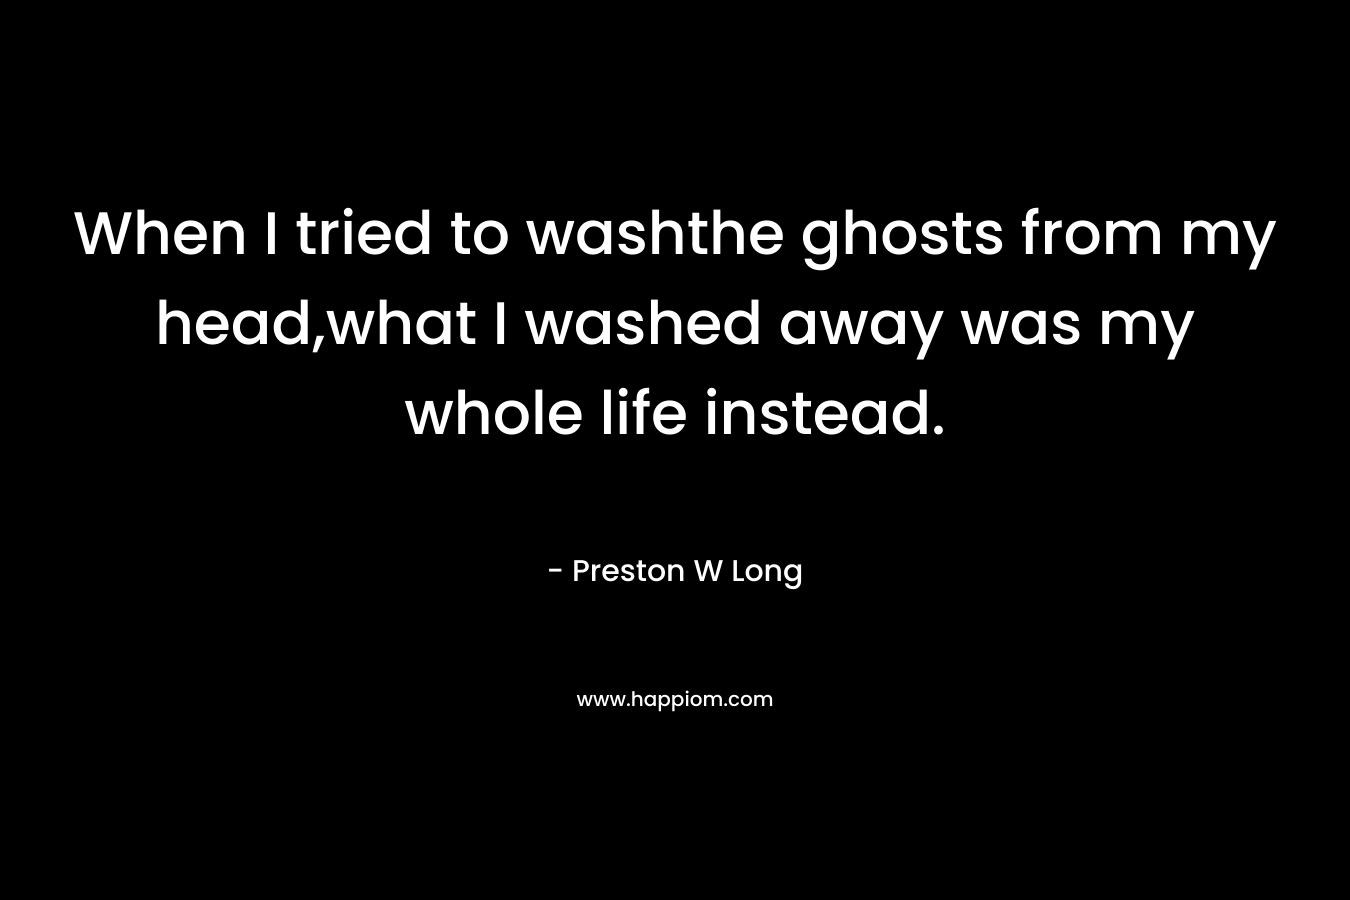 When I tried to washthe ghosts from my head,what I washed away was my whole life instead. – Preston W Long